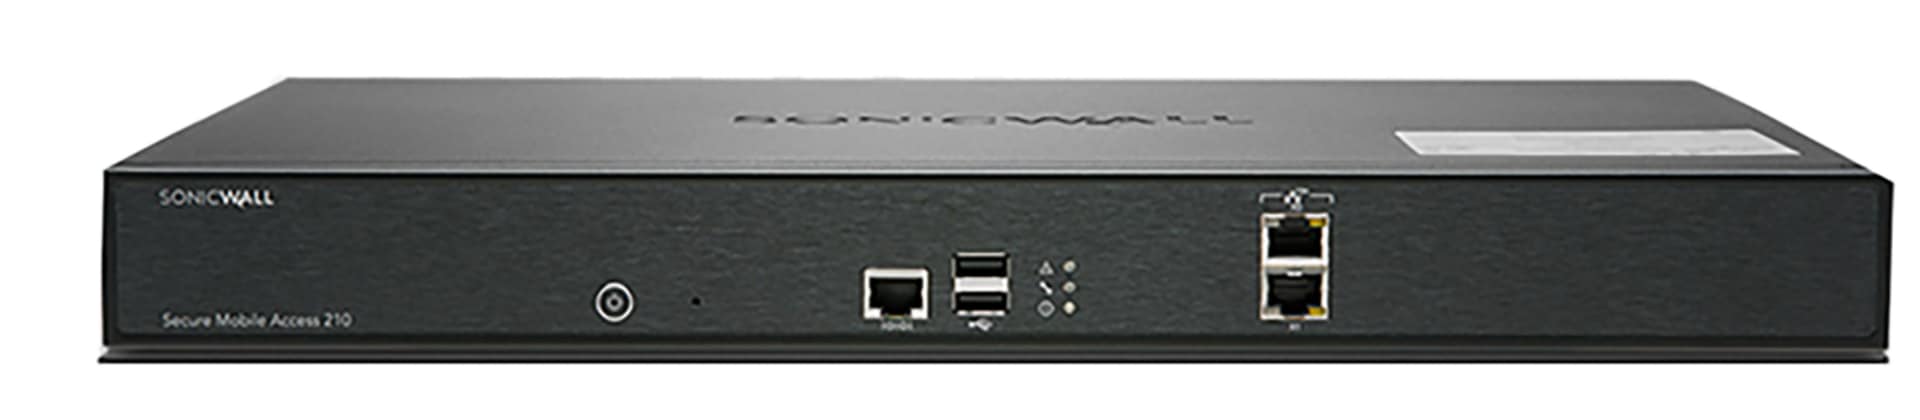 SonicWall Secure Mobile Access 210 - security appliance - with 3 years 24x7